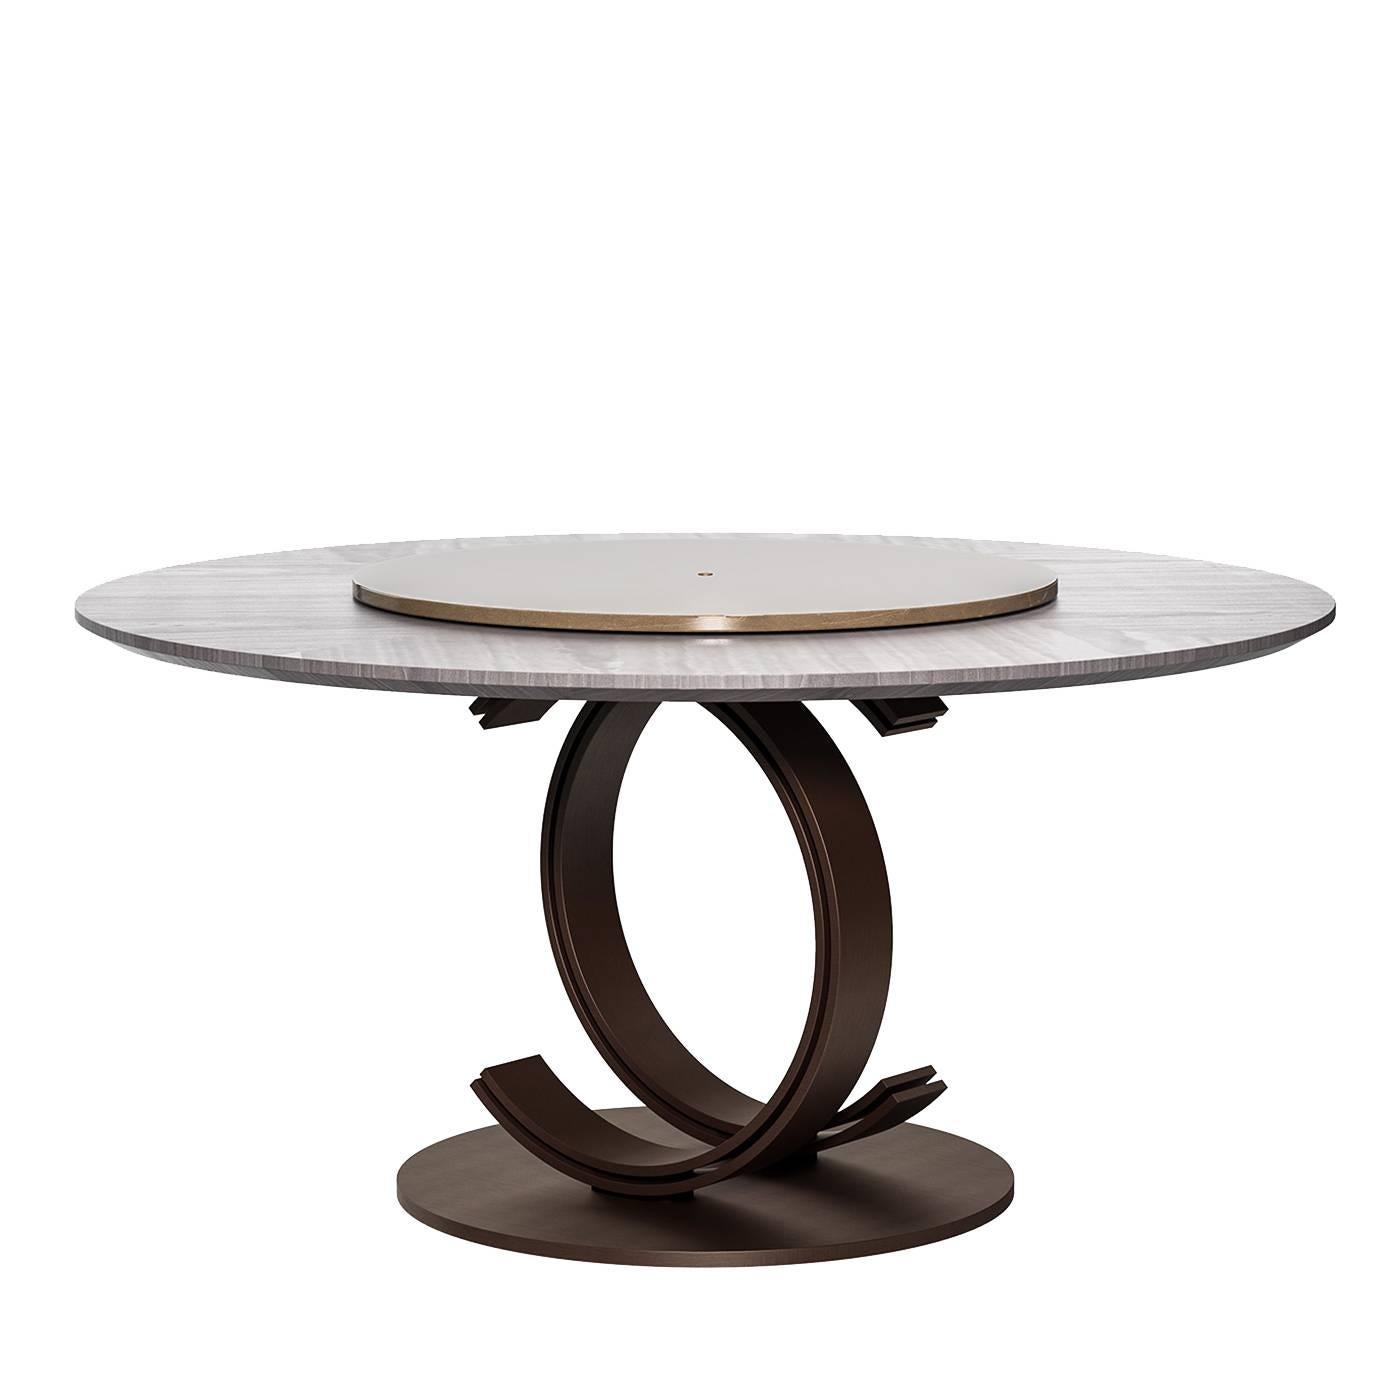 Bluemoon Round Dining Table For Sale